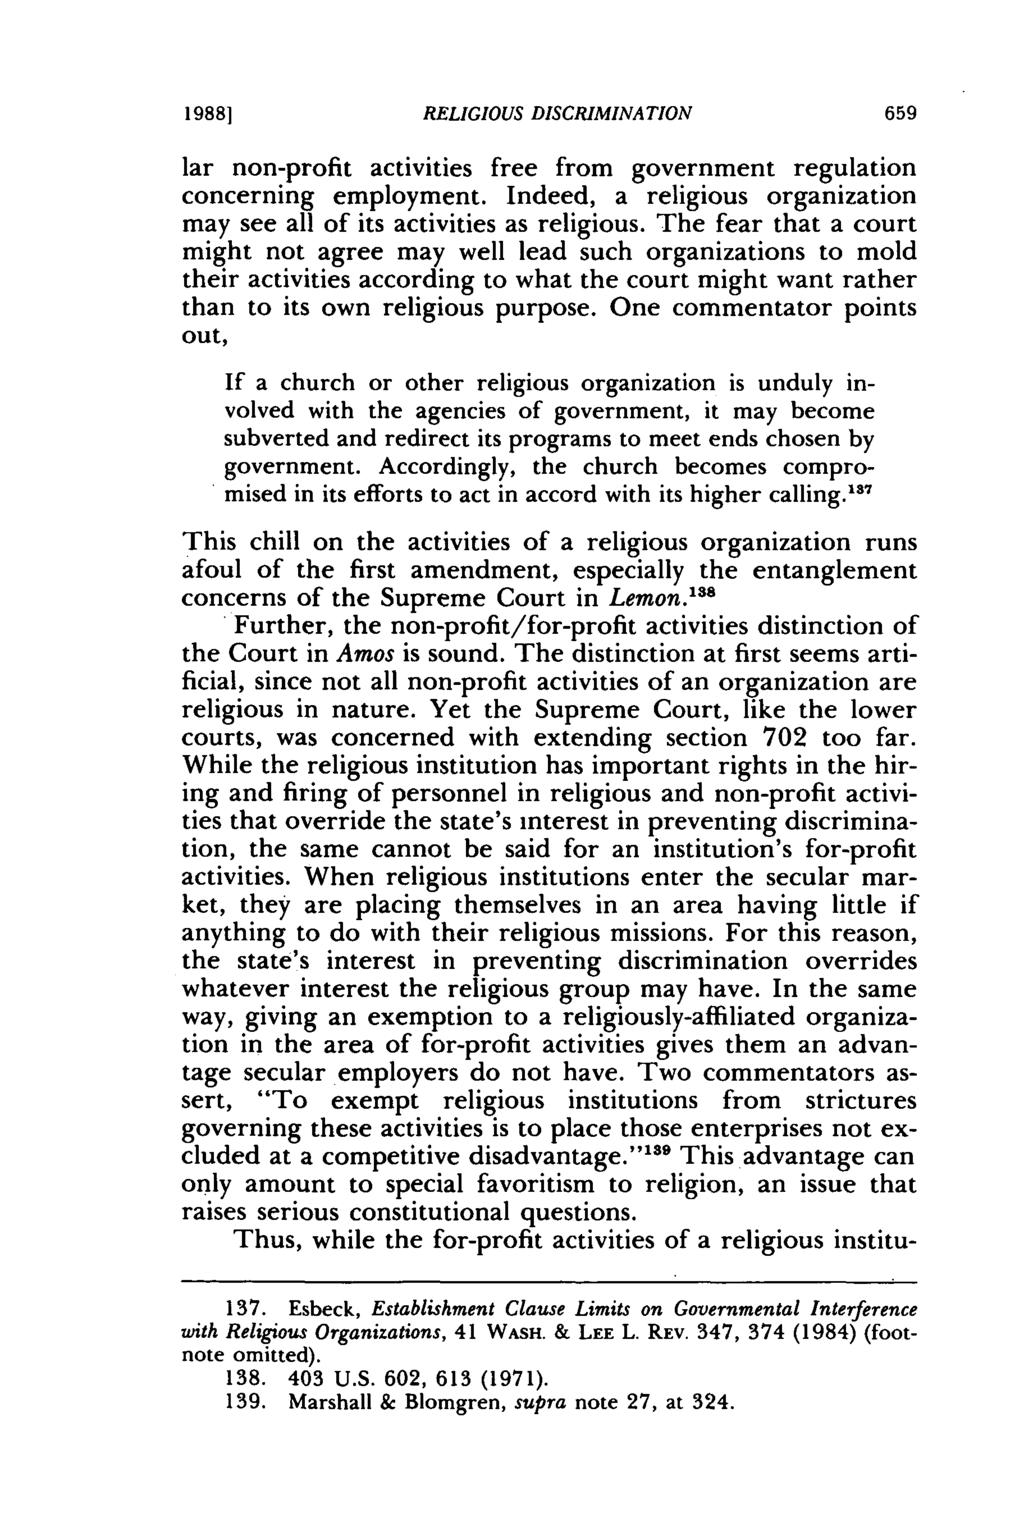 19881 RELIGIOUS DISCRIMINATION lar non-profit activities free from government regulation concerning employment. Indeed, a religious organization may see all of its activities as religious.